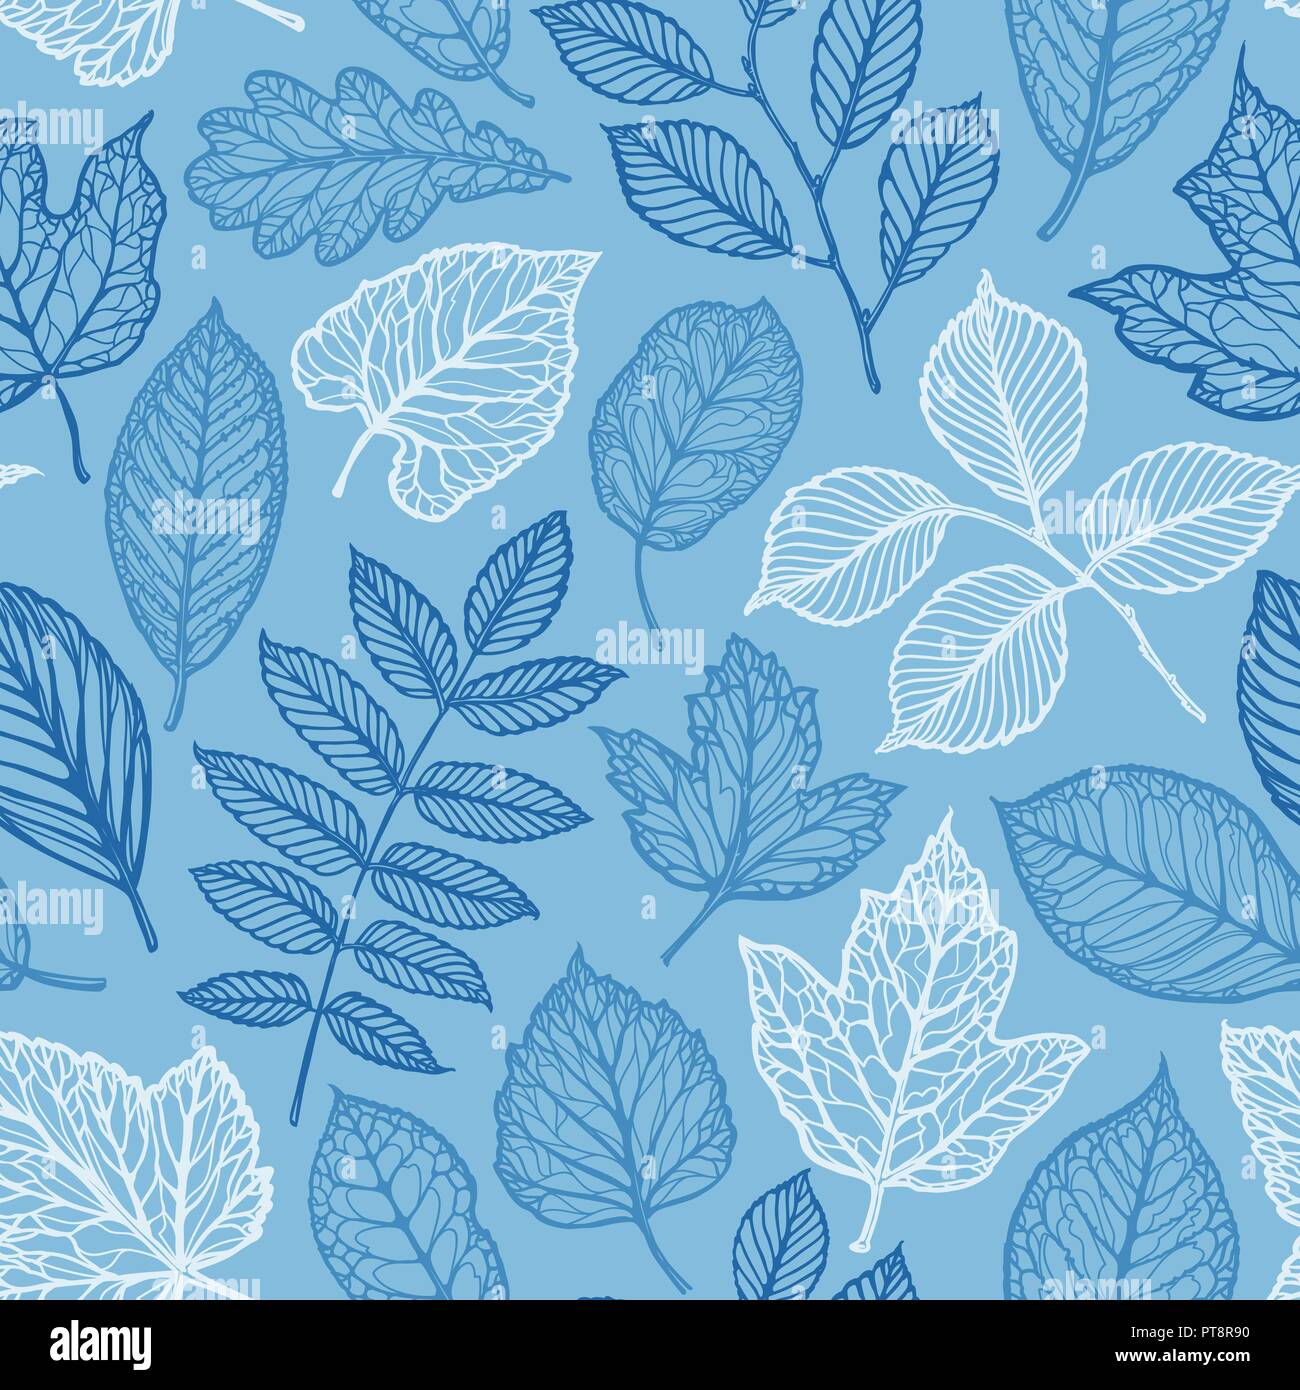 Floral pattern. Hand-drawn decorative leaves. Seamless background vector illustration Stock Vector